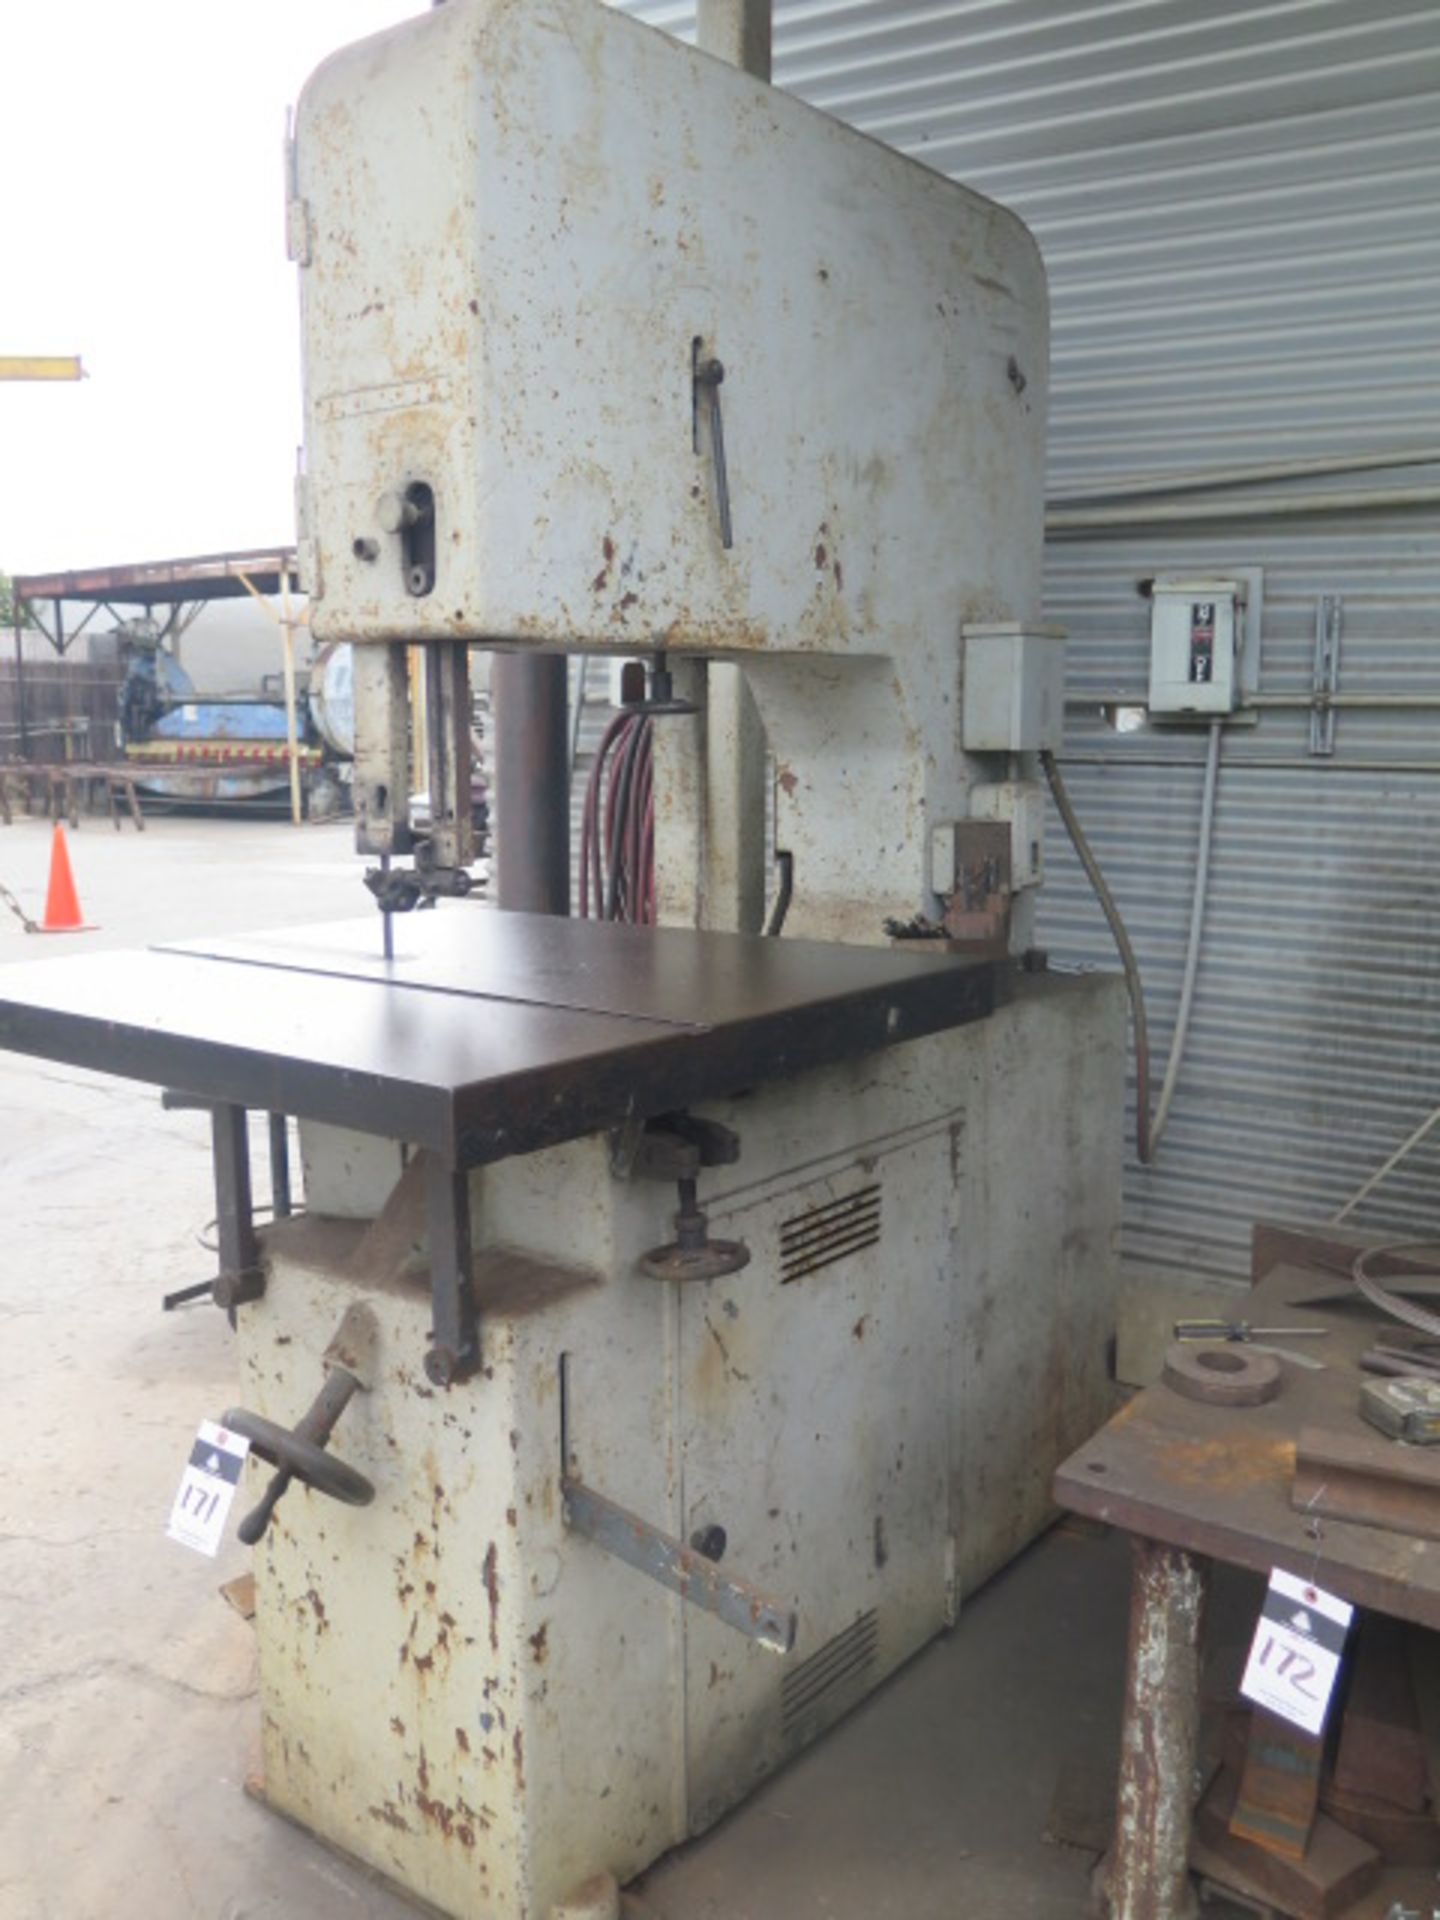 Tannewitz “Di-SAW” 36”/23” Vertical Band Saw w/ Adjustable FPM, 36” x 40” Miter Table - Image 2 of 6